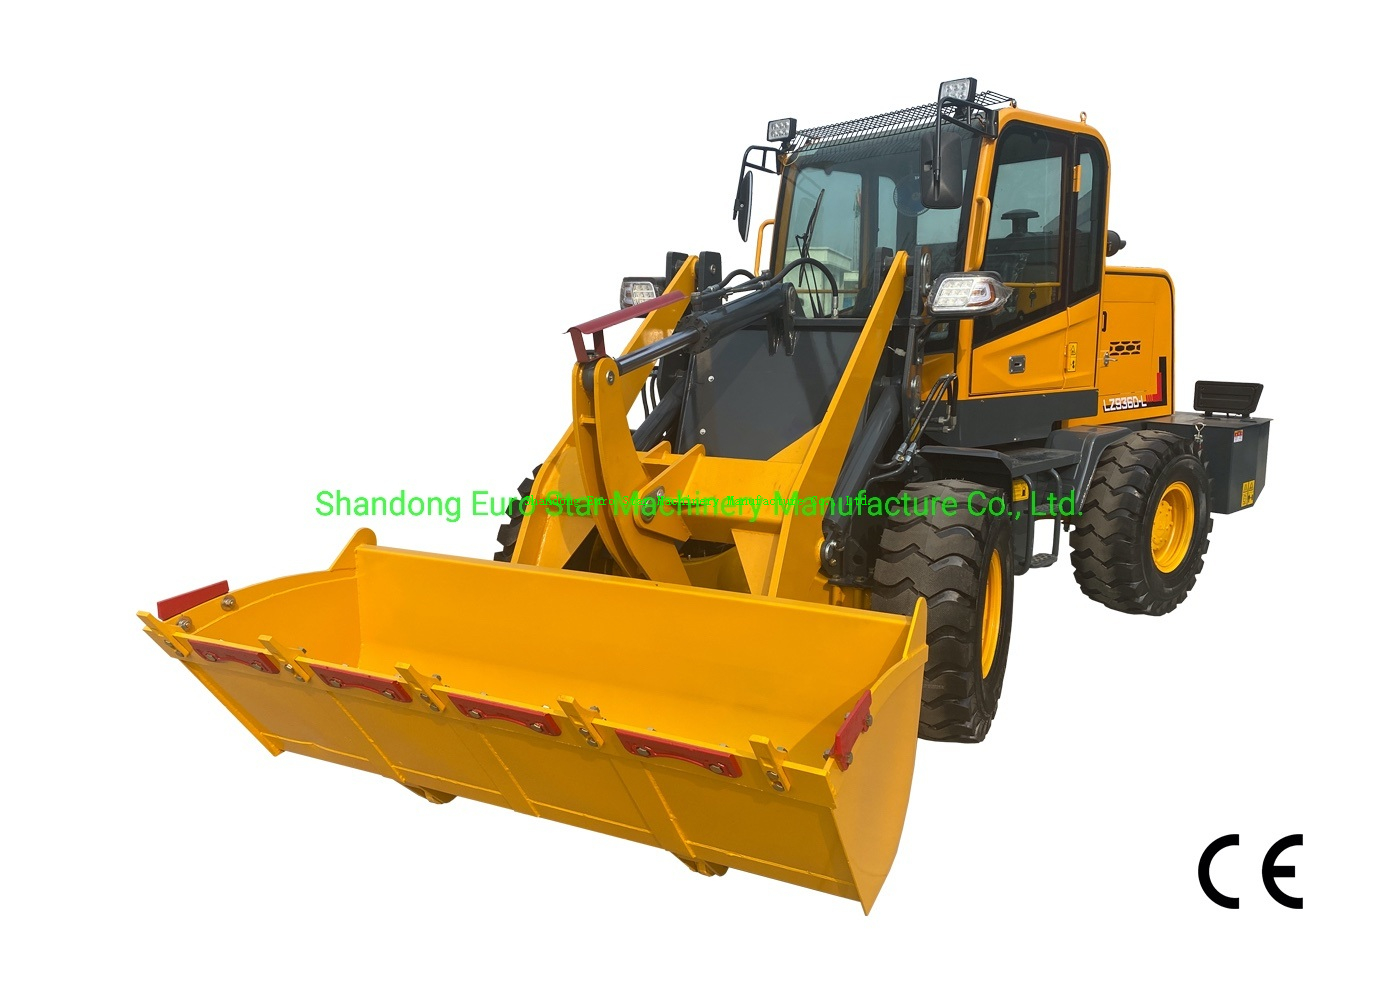 1-6t-Ez936-Wheel-Loader-Multi-Functional-Mini-Small-CE-Approved-China-Farm-Construction-Medium-Bucket-Machinery-Compact-Backhoe-Excavator-Front-End-Loader (6).jpg